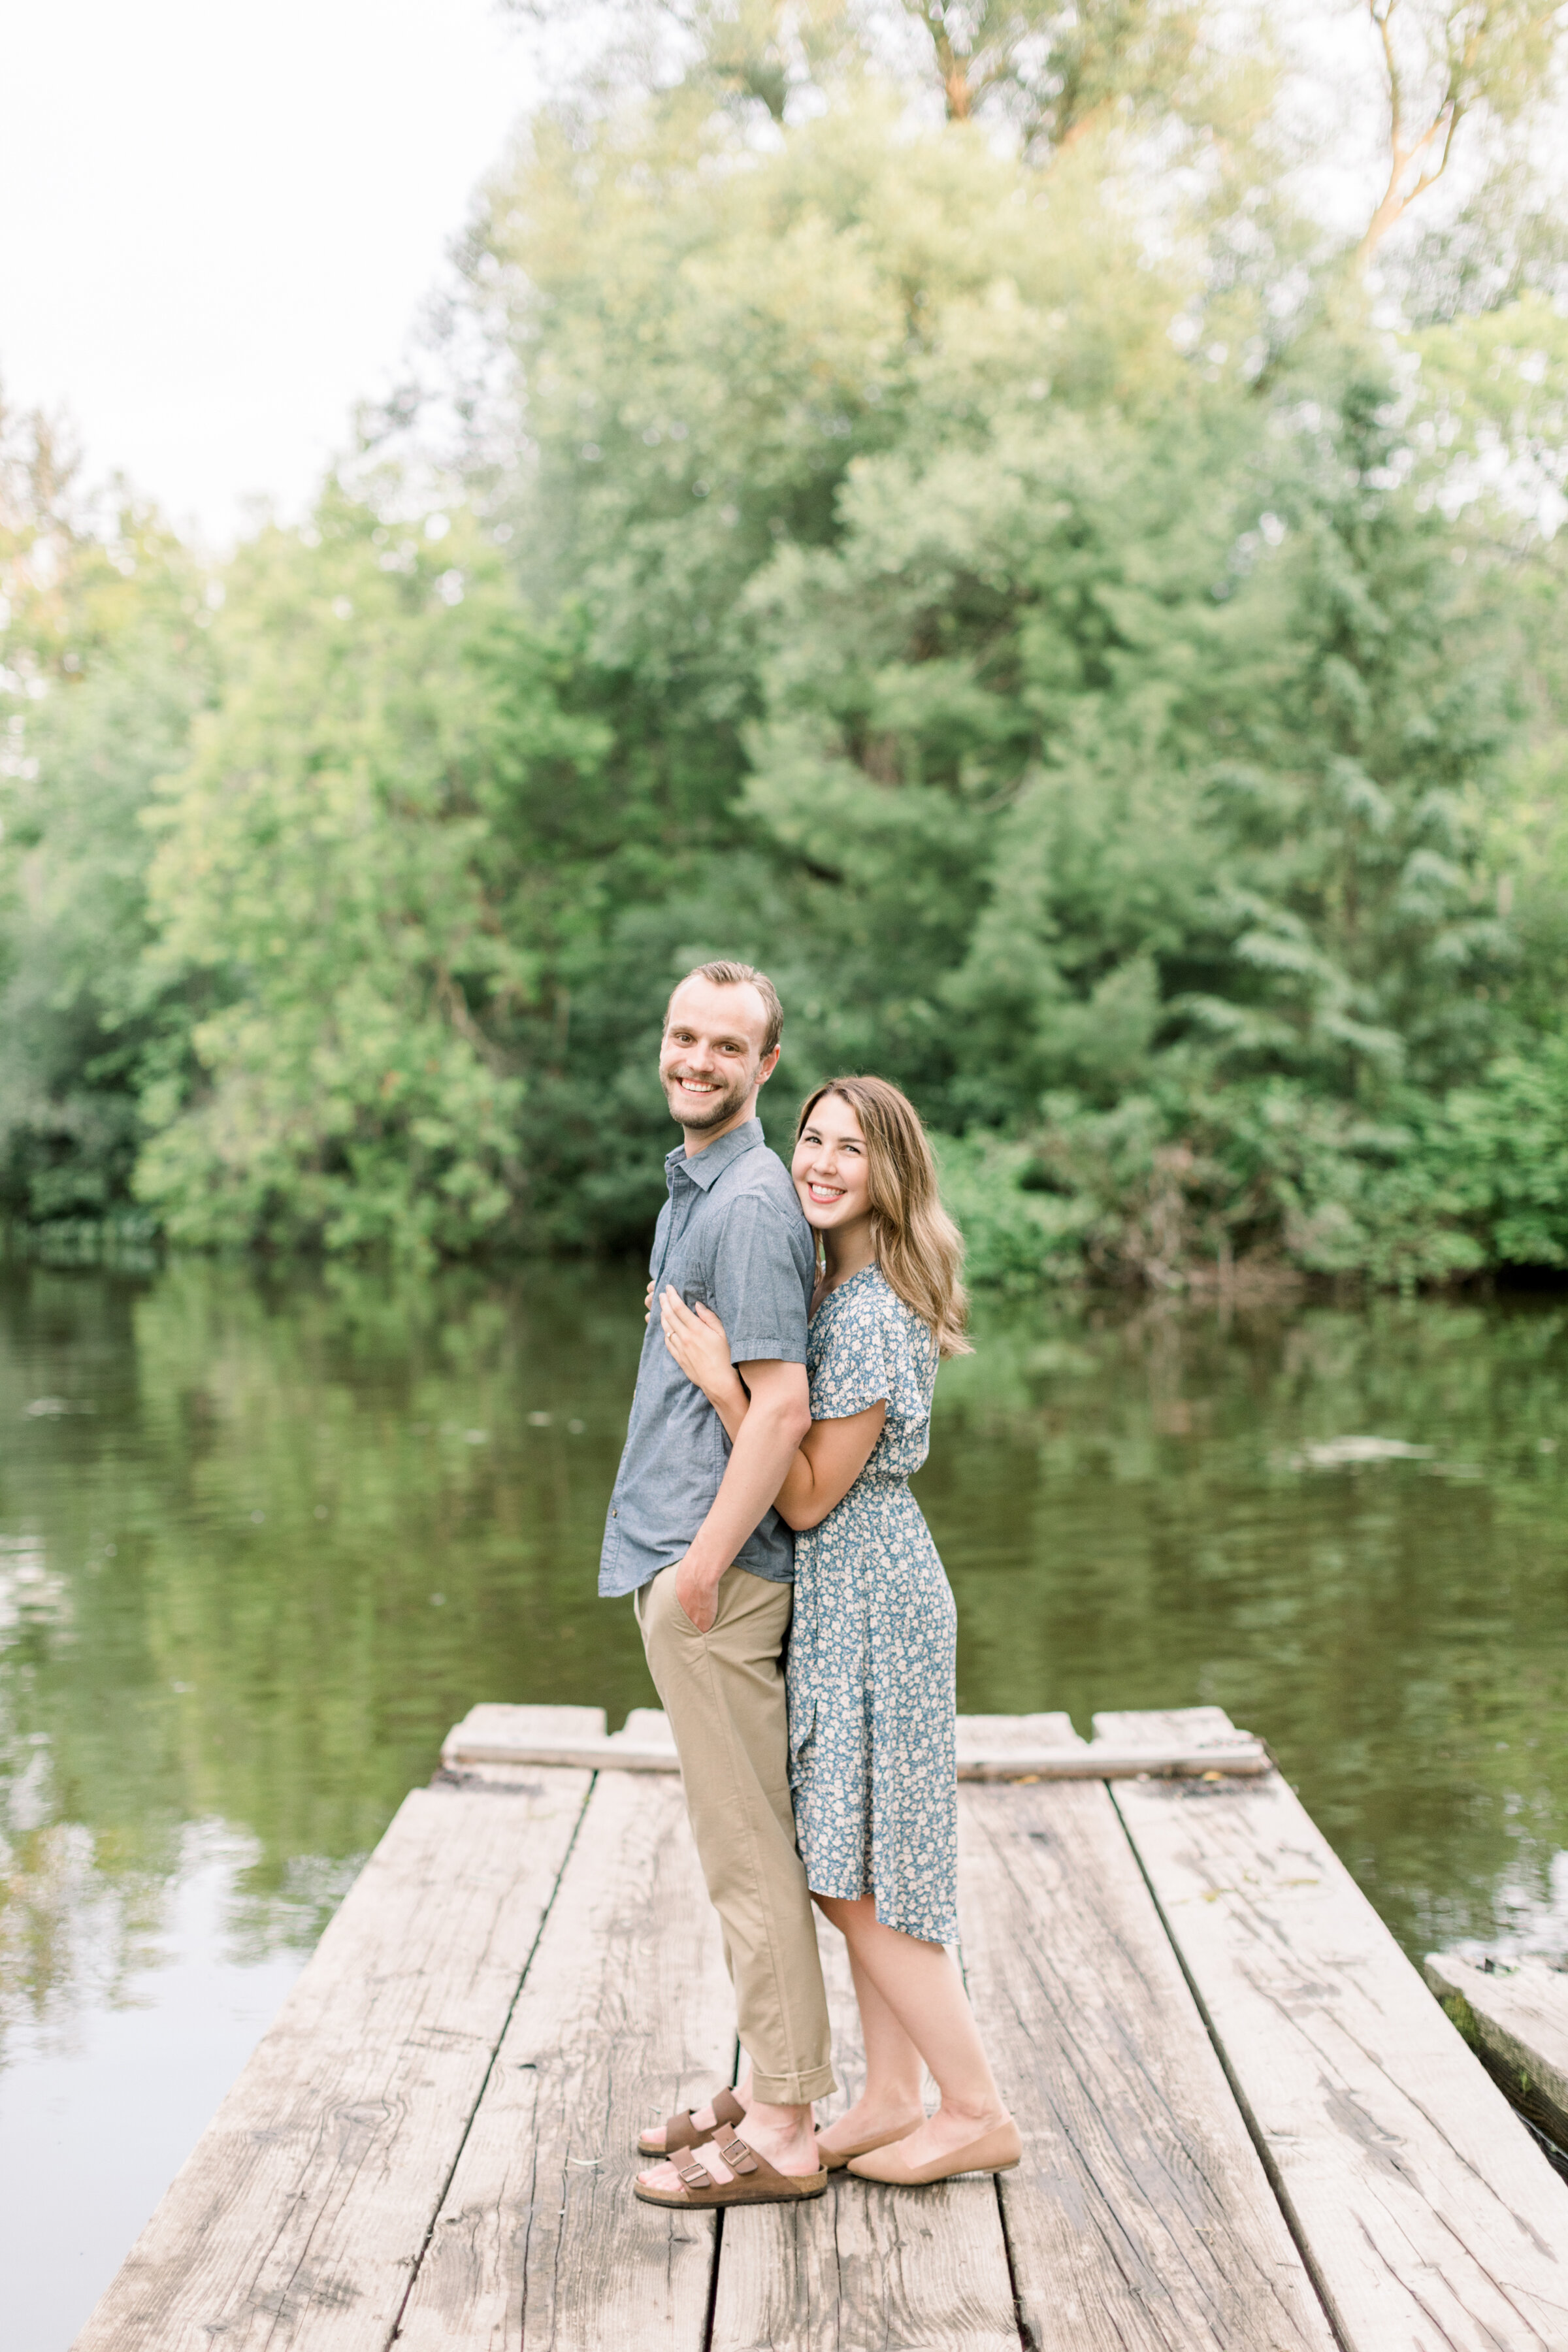  Beautiful couple in perfect engagement photoshoot location on a wood dock by a beautiful lake by Chelsea Mason Photography in Ottawa, ON. lake locations for photoshoot best wedding photographer in ottawa lake photoshoot locations places with docks f